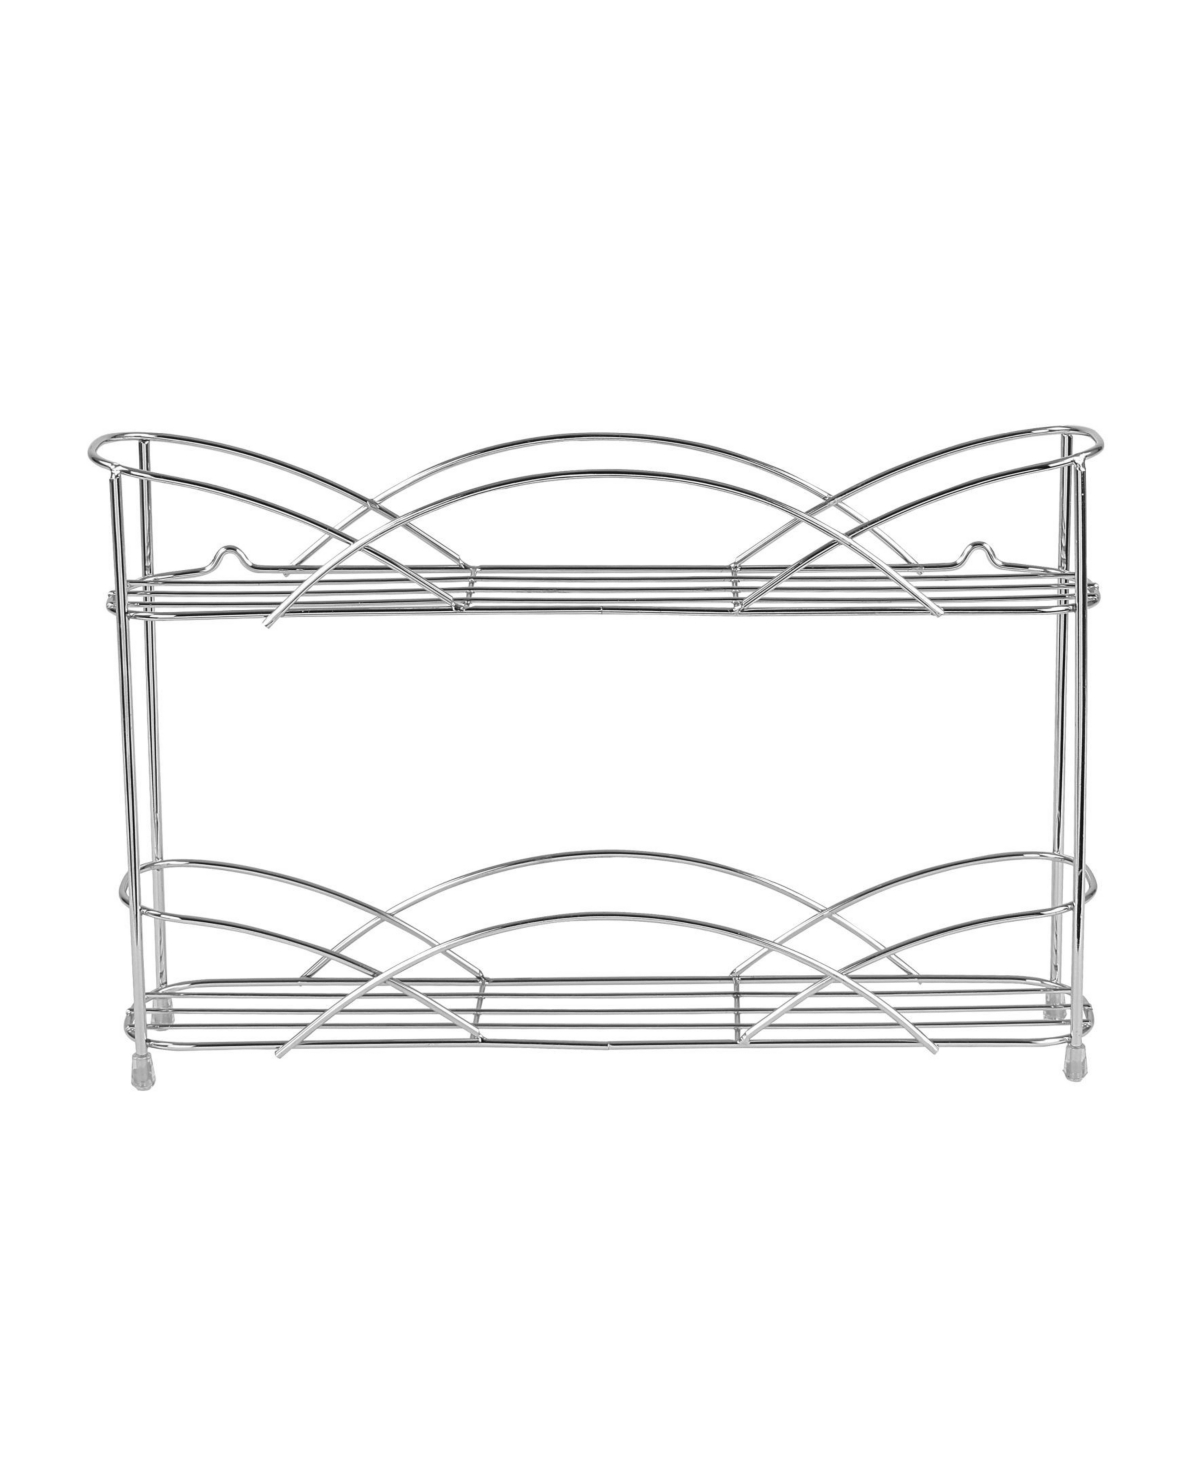 Countertop Wall Mount 2-Tier Spice Rack - Chrome